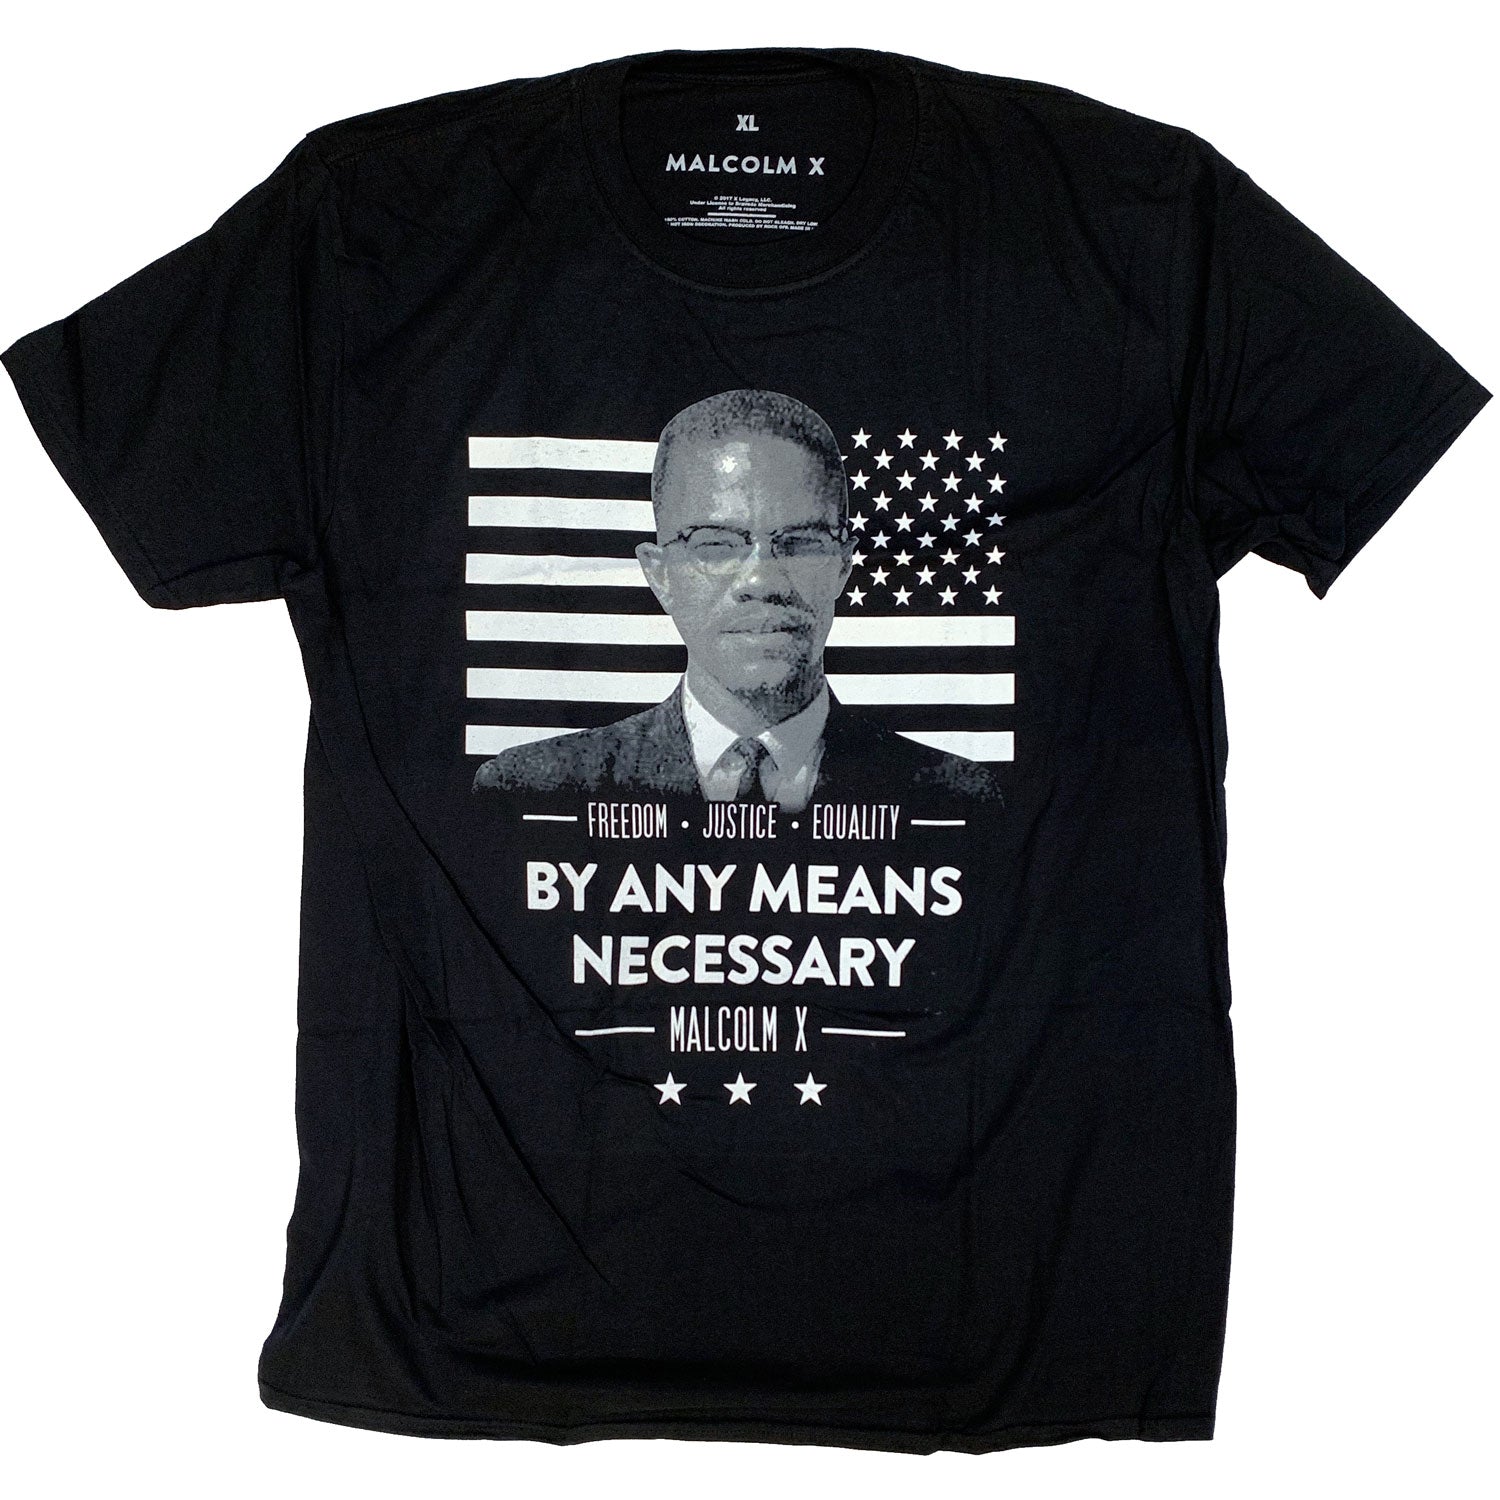 Malcolm X T shirt - By Any Means Necessary 100% Official